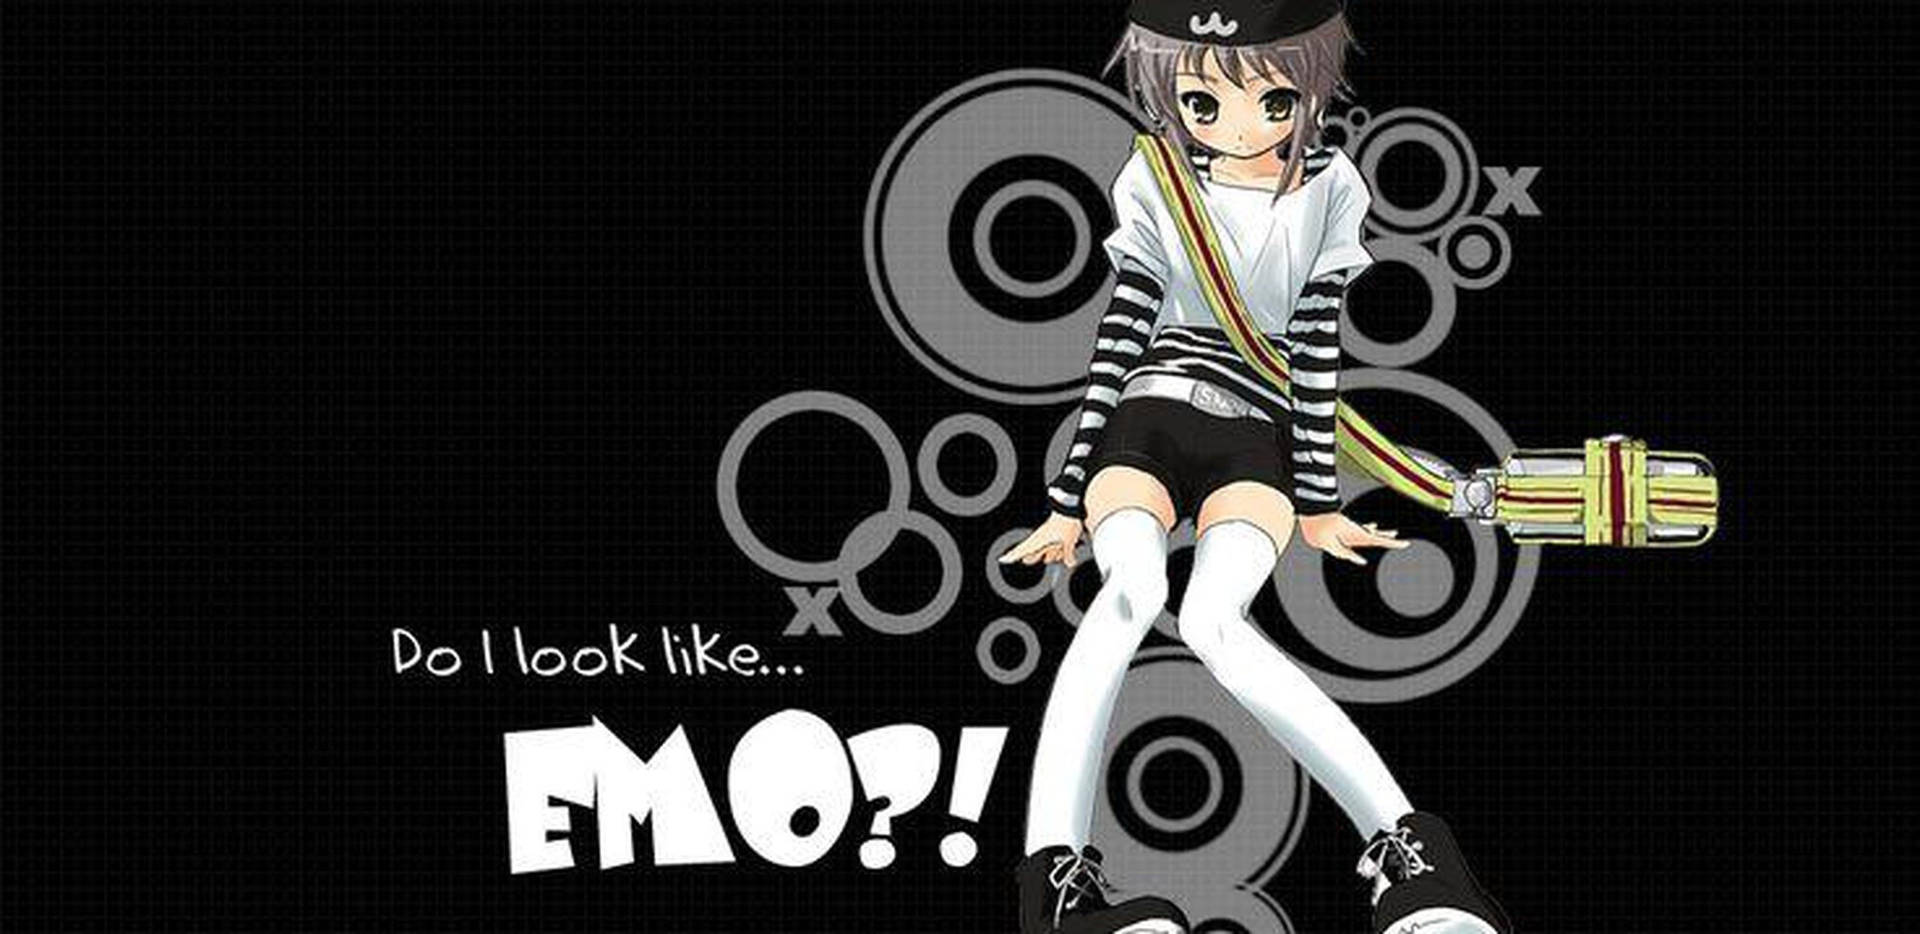 Brighten Up Your World With This Beautiful, Cute Emo Anime Girl.